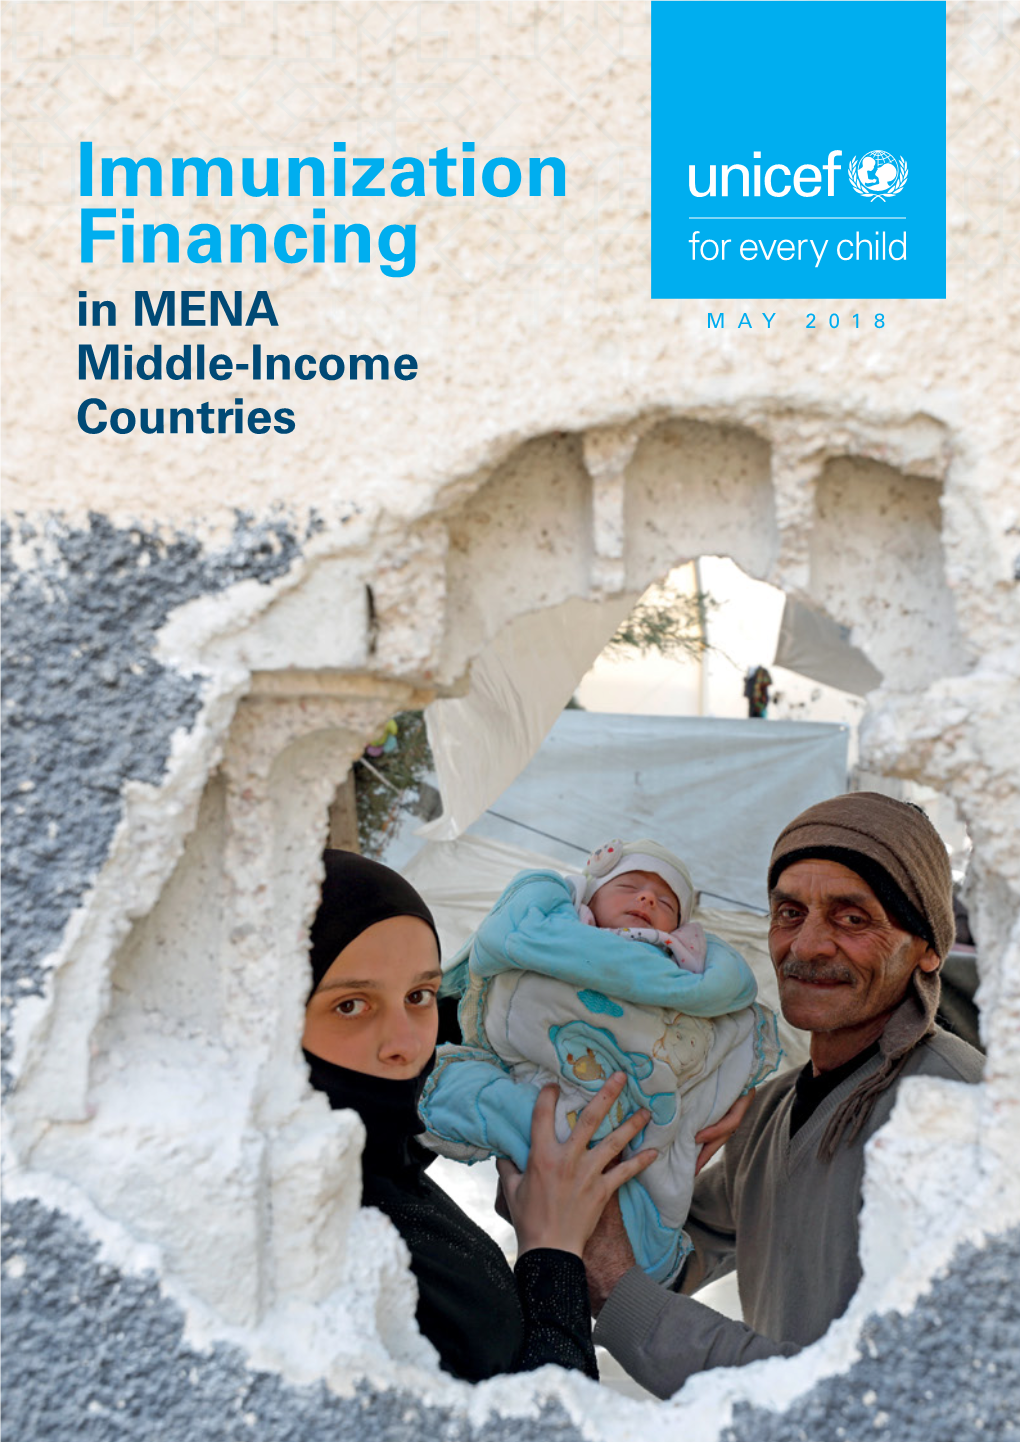 Immunization Financing in MENA Middle-Income Countries